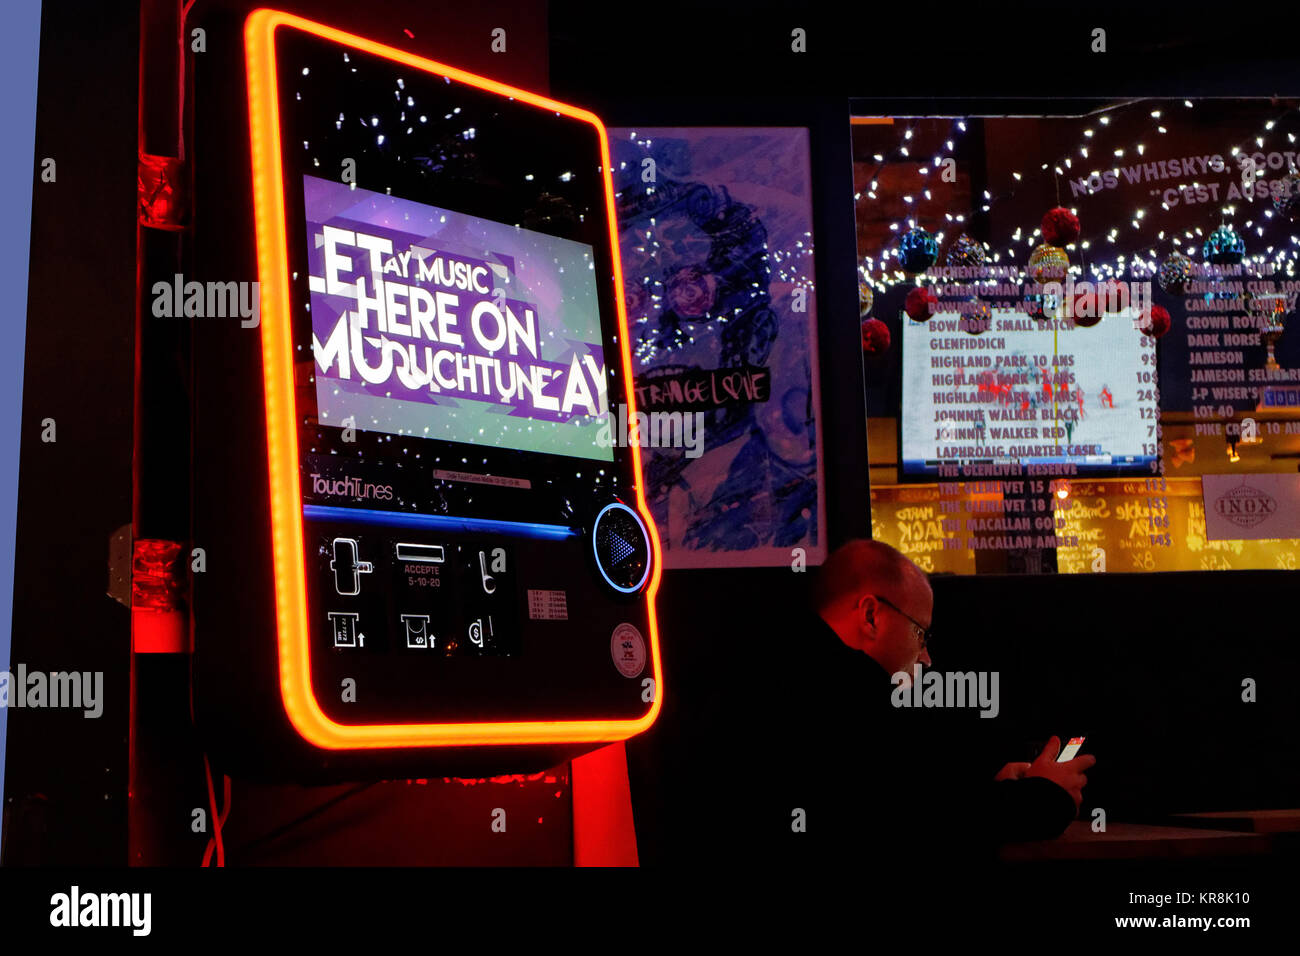 A digital jukebox that looks like a cell phone in a abar in Quebec CIty Stock Photo